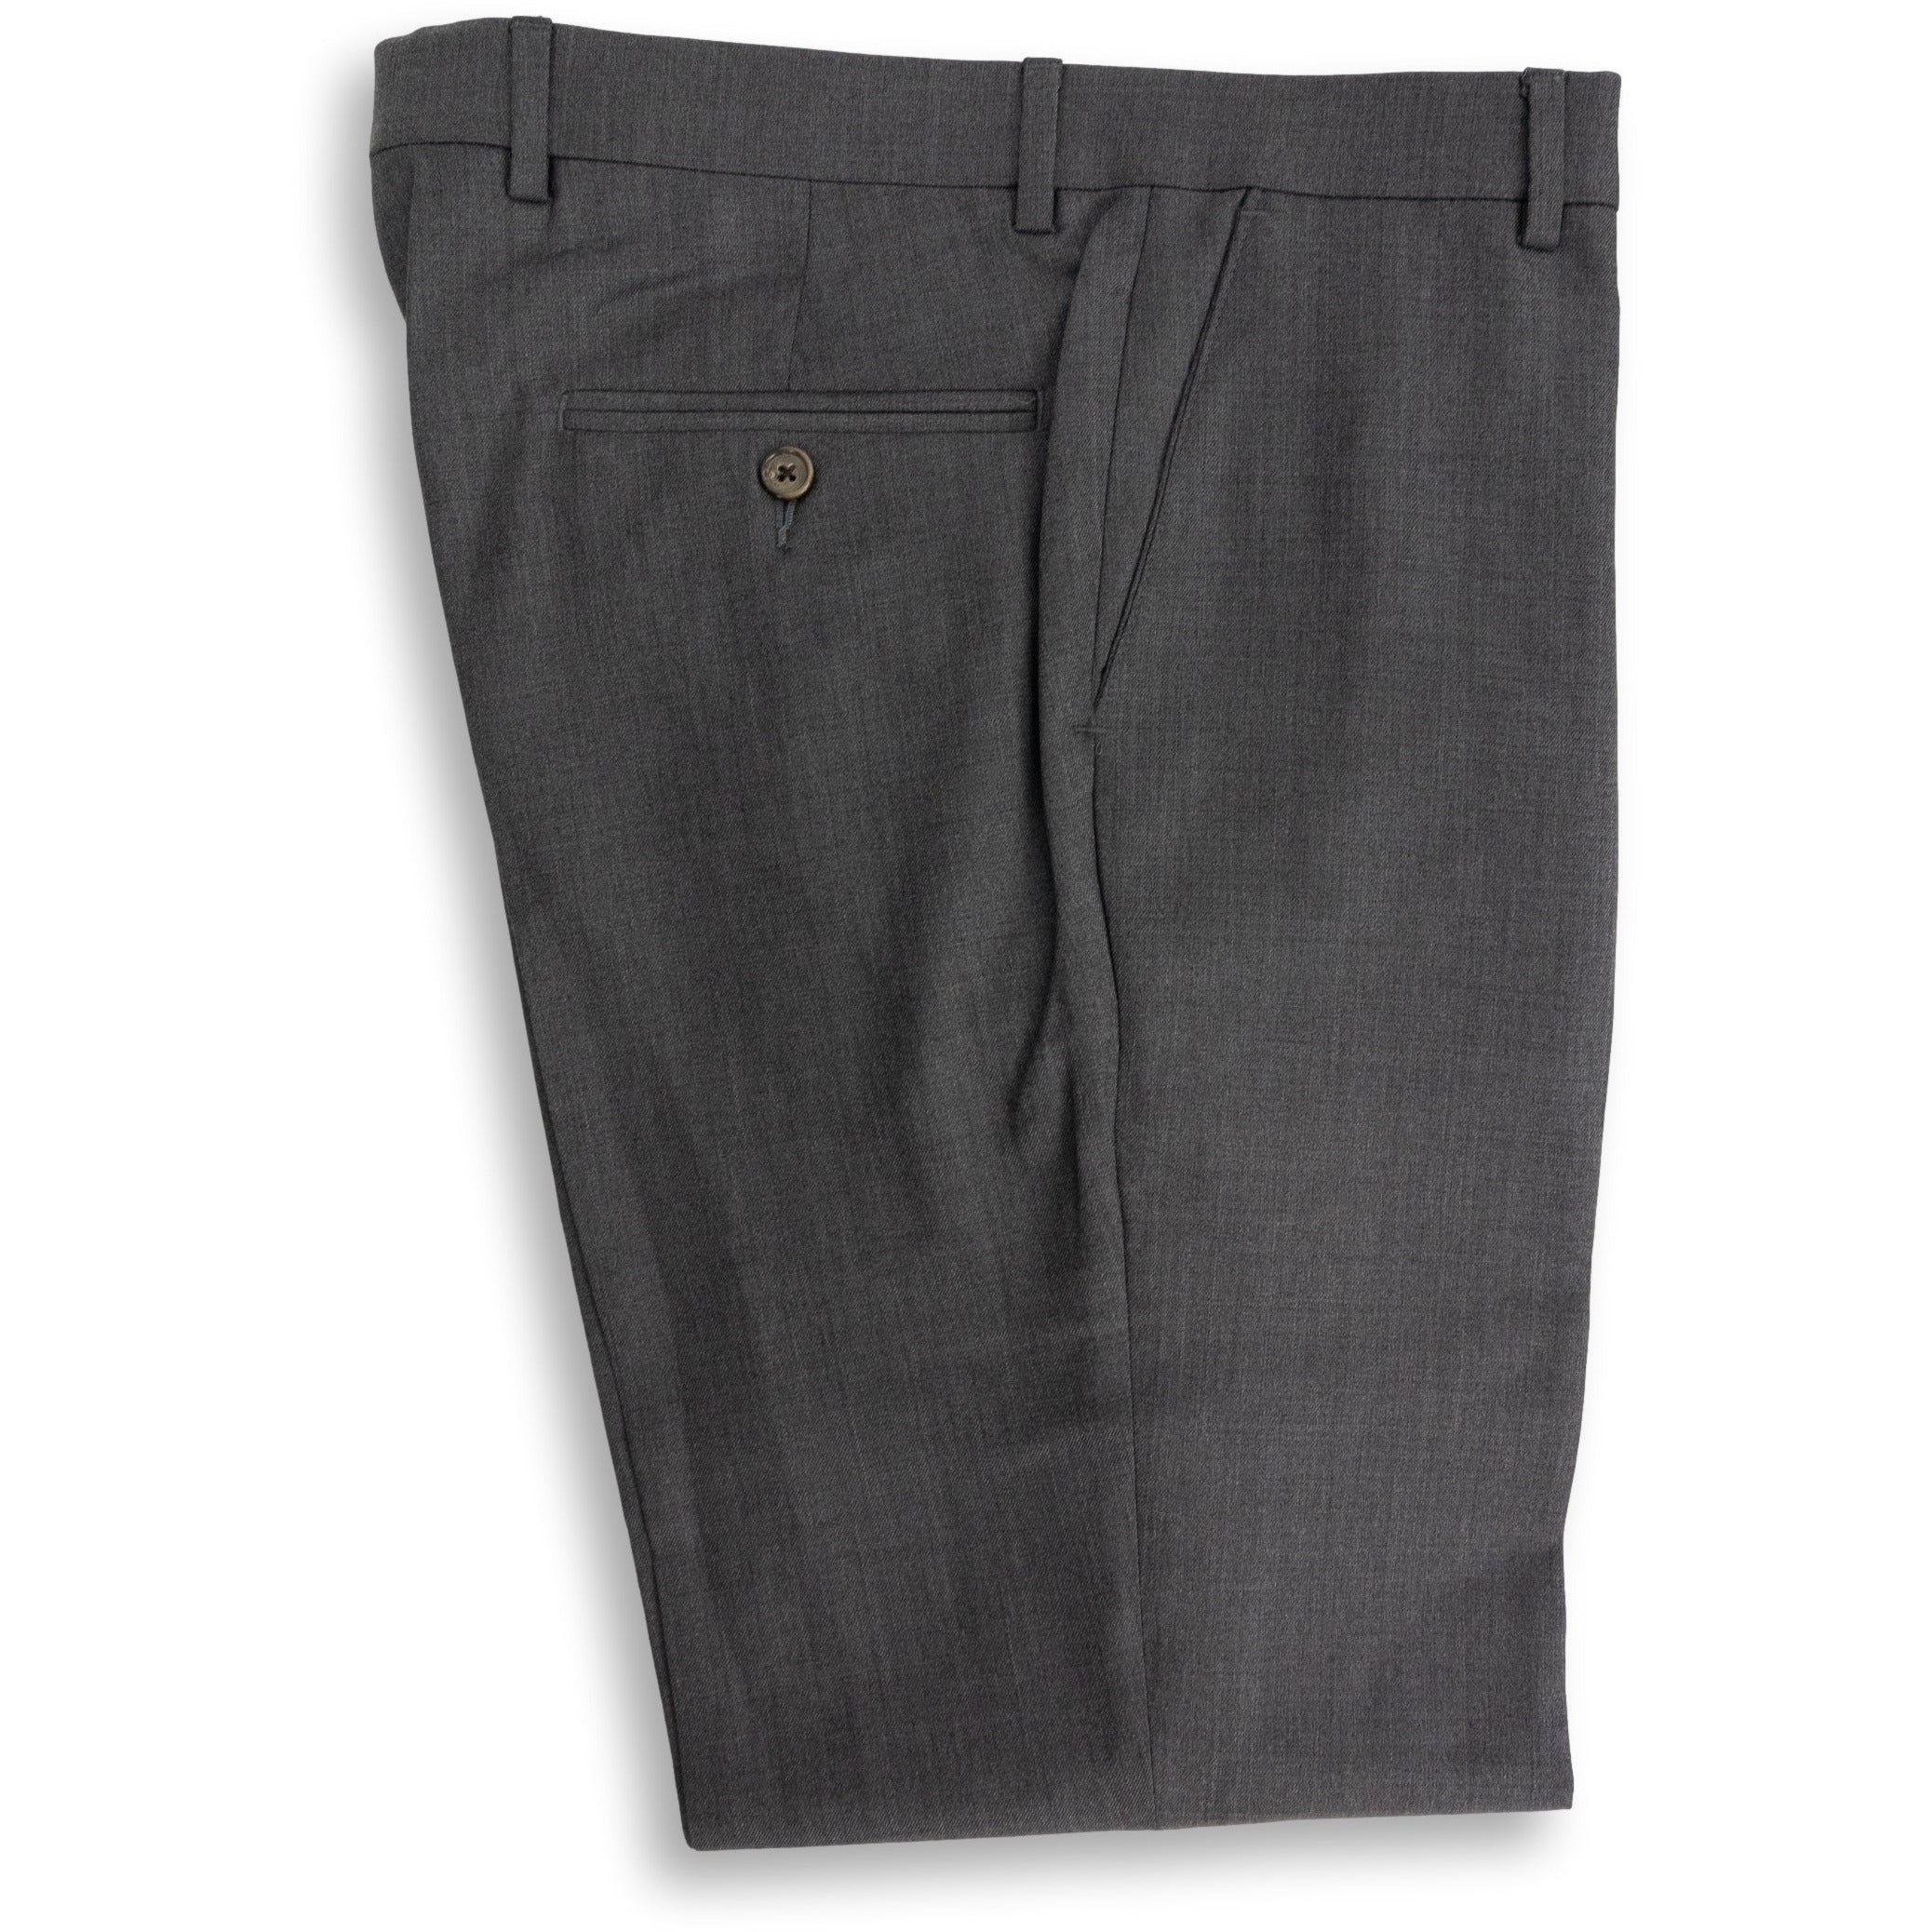 100% Worsted Wool Super 130's Dress Trouser